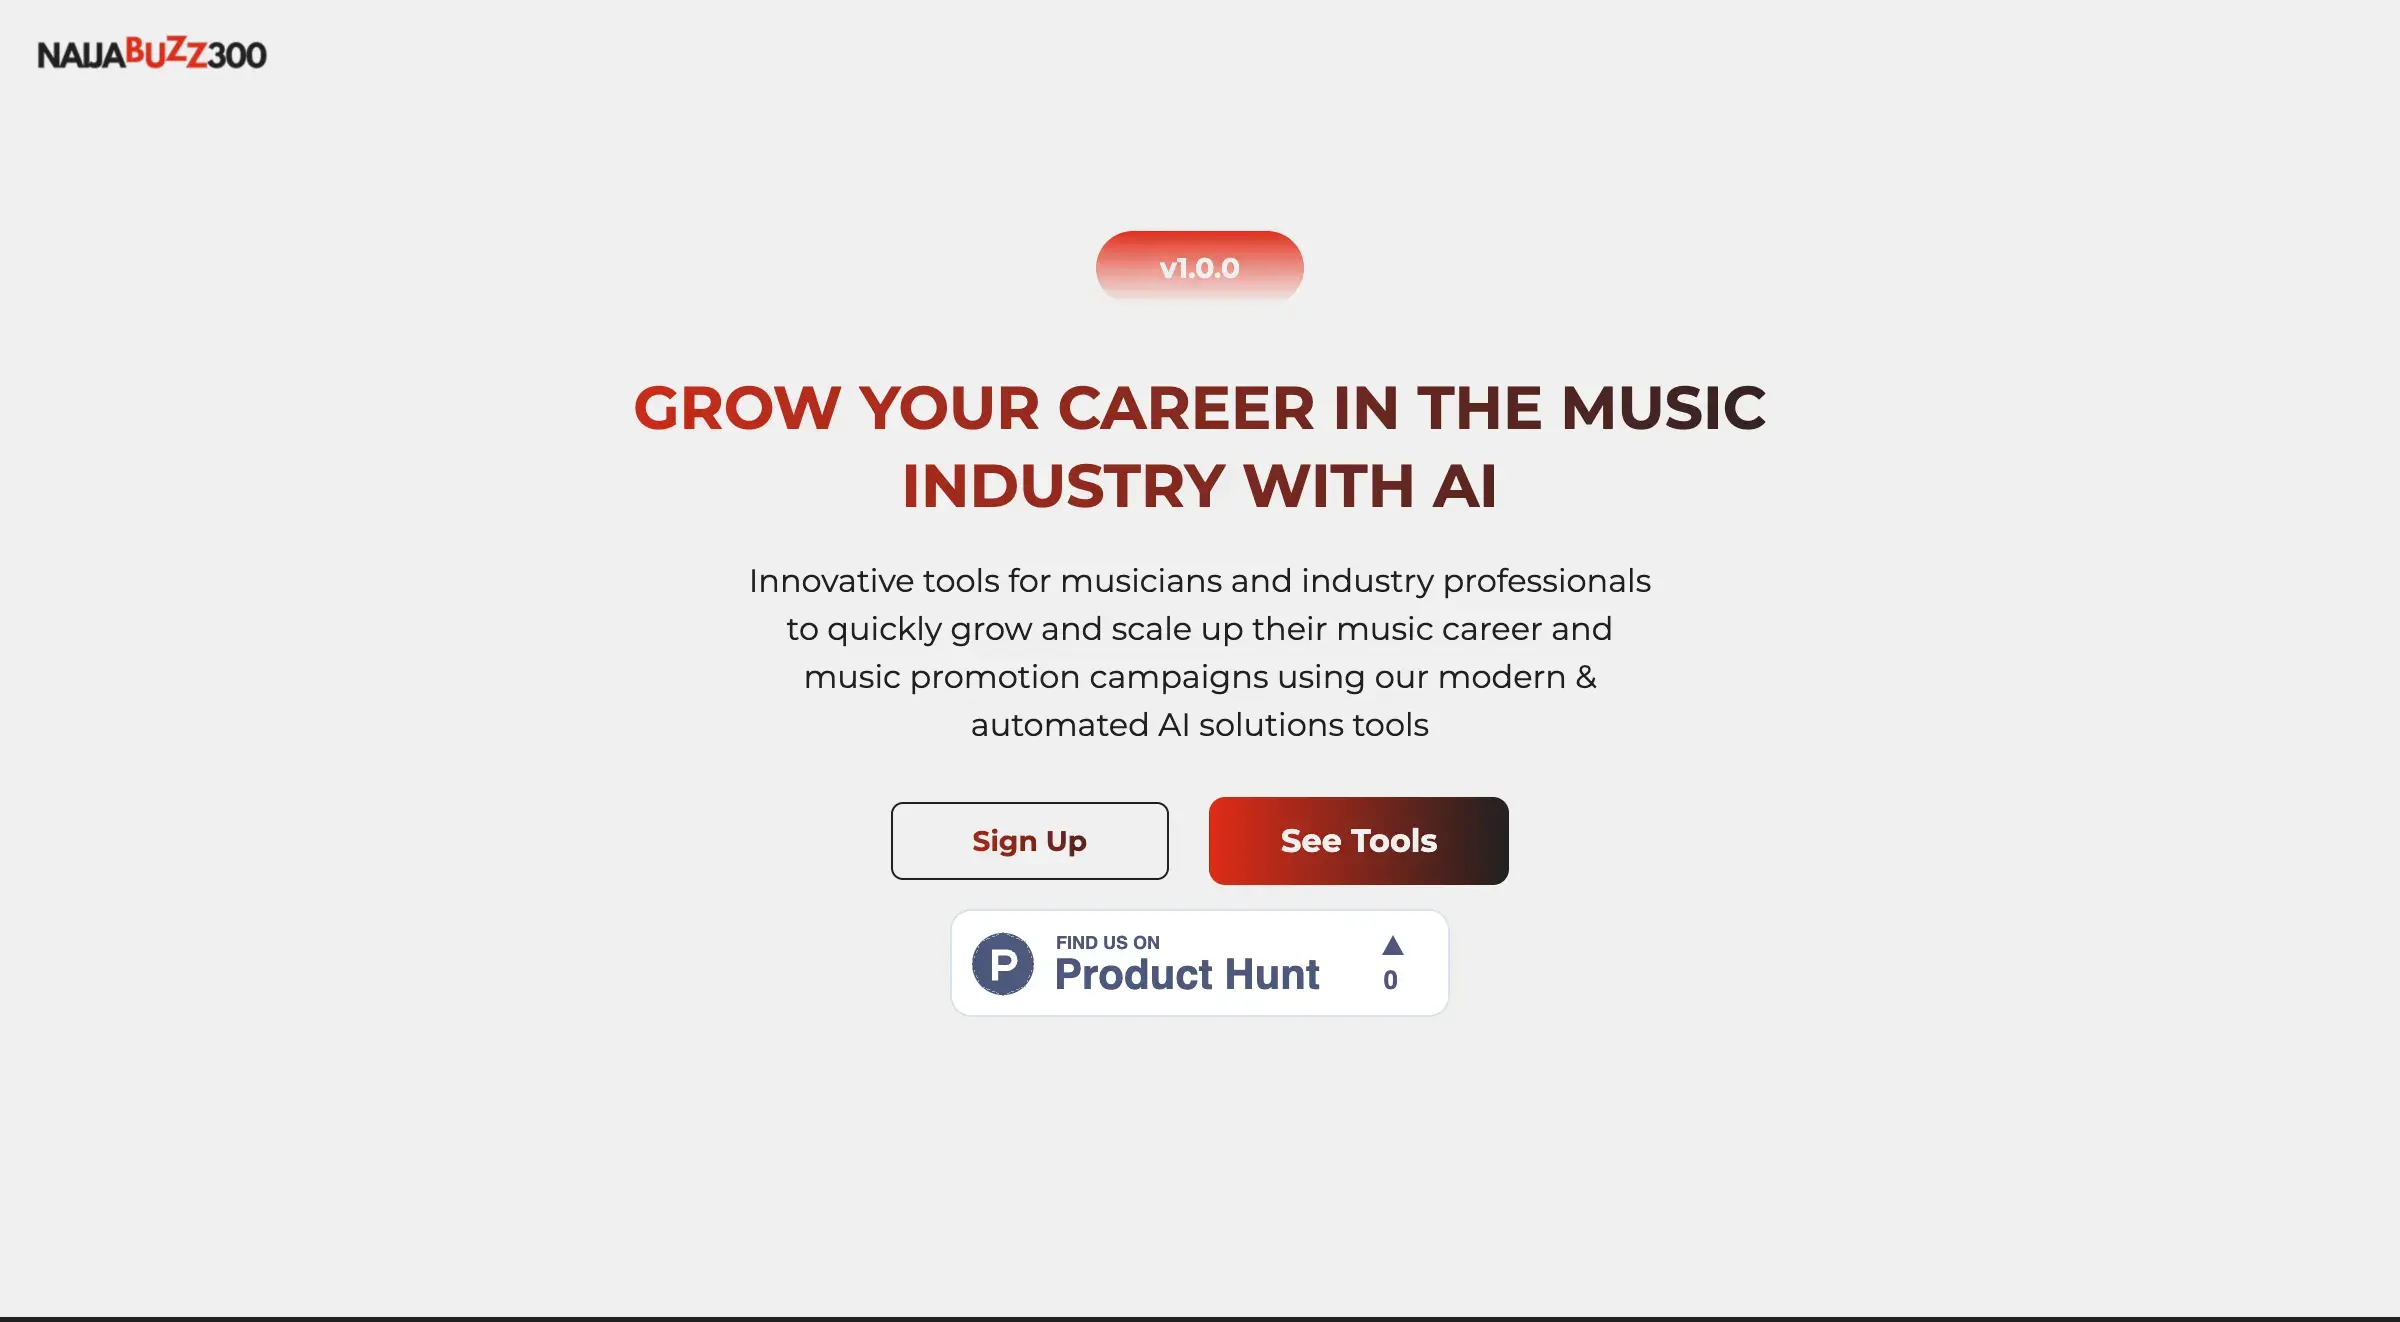 NaijaBuzz300 - AI Solution Tools For The Music Industry